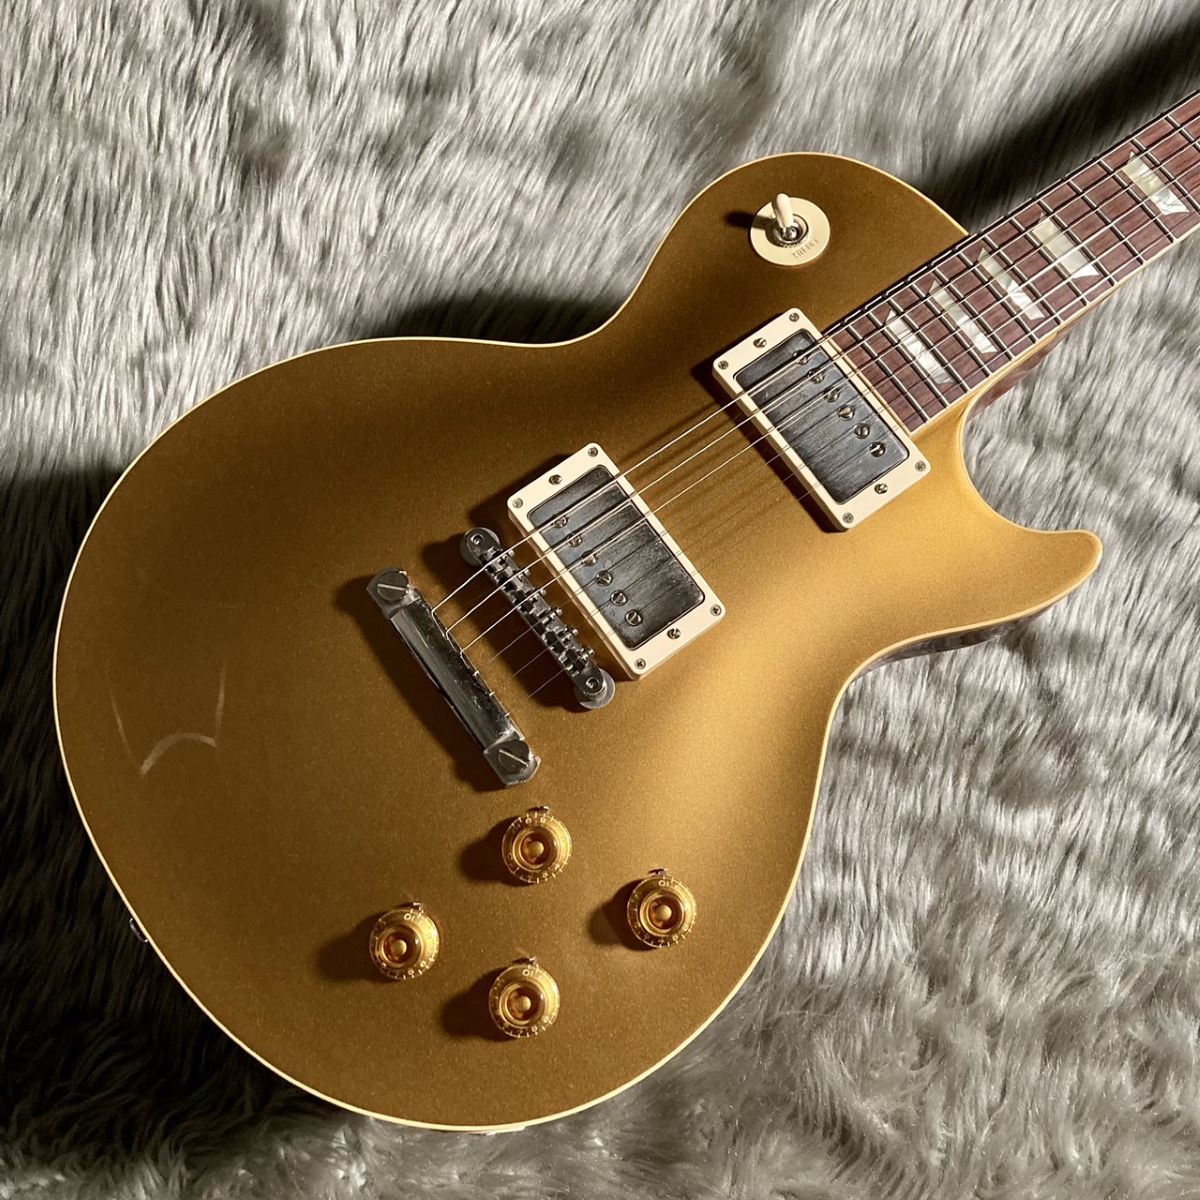 Gibson 1957 Les Paul Gold Top Reissue VOS No Pickguard ギブソン